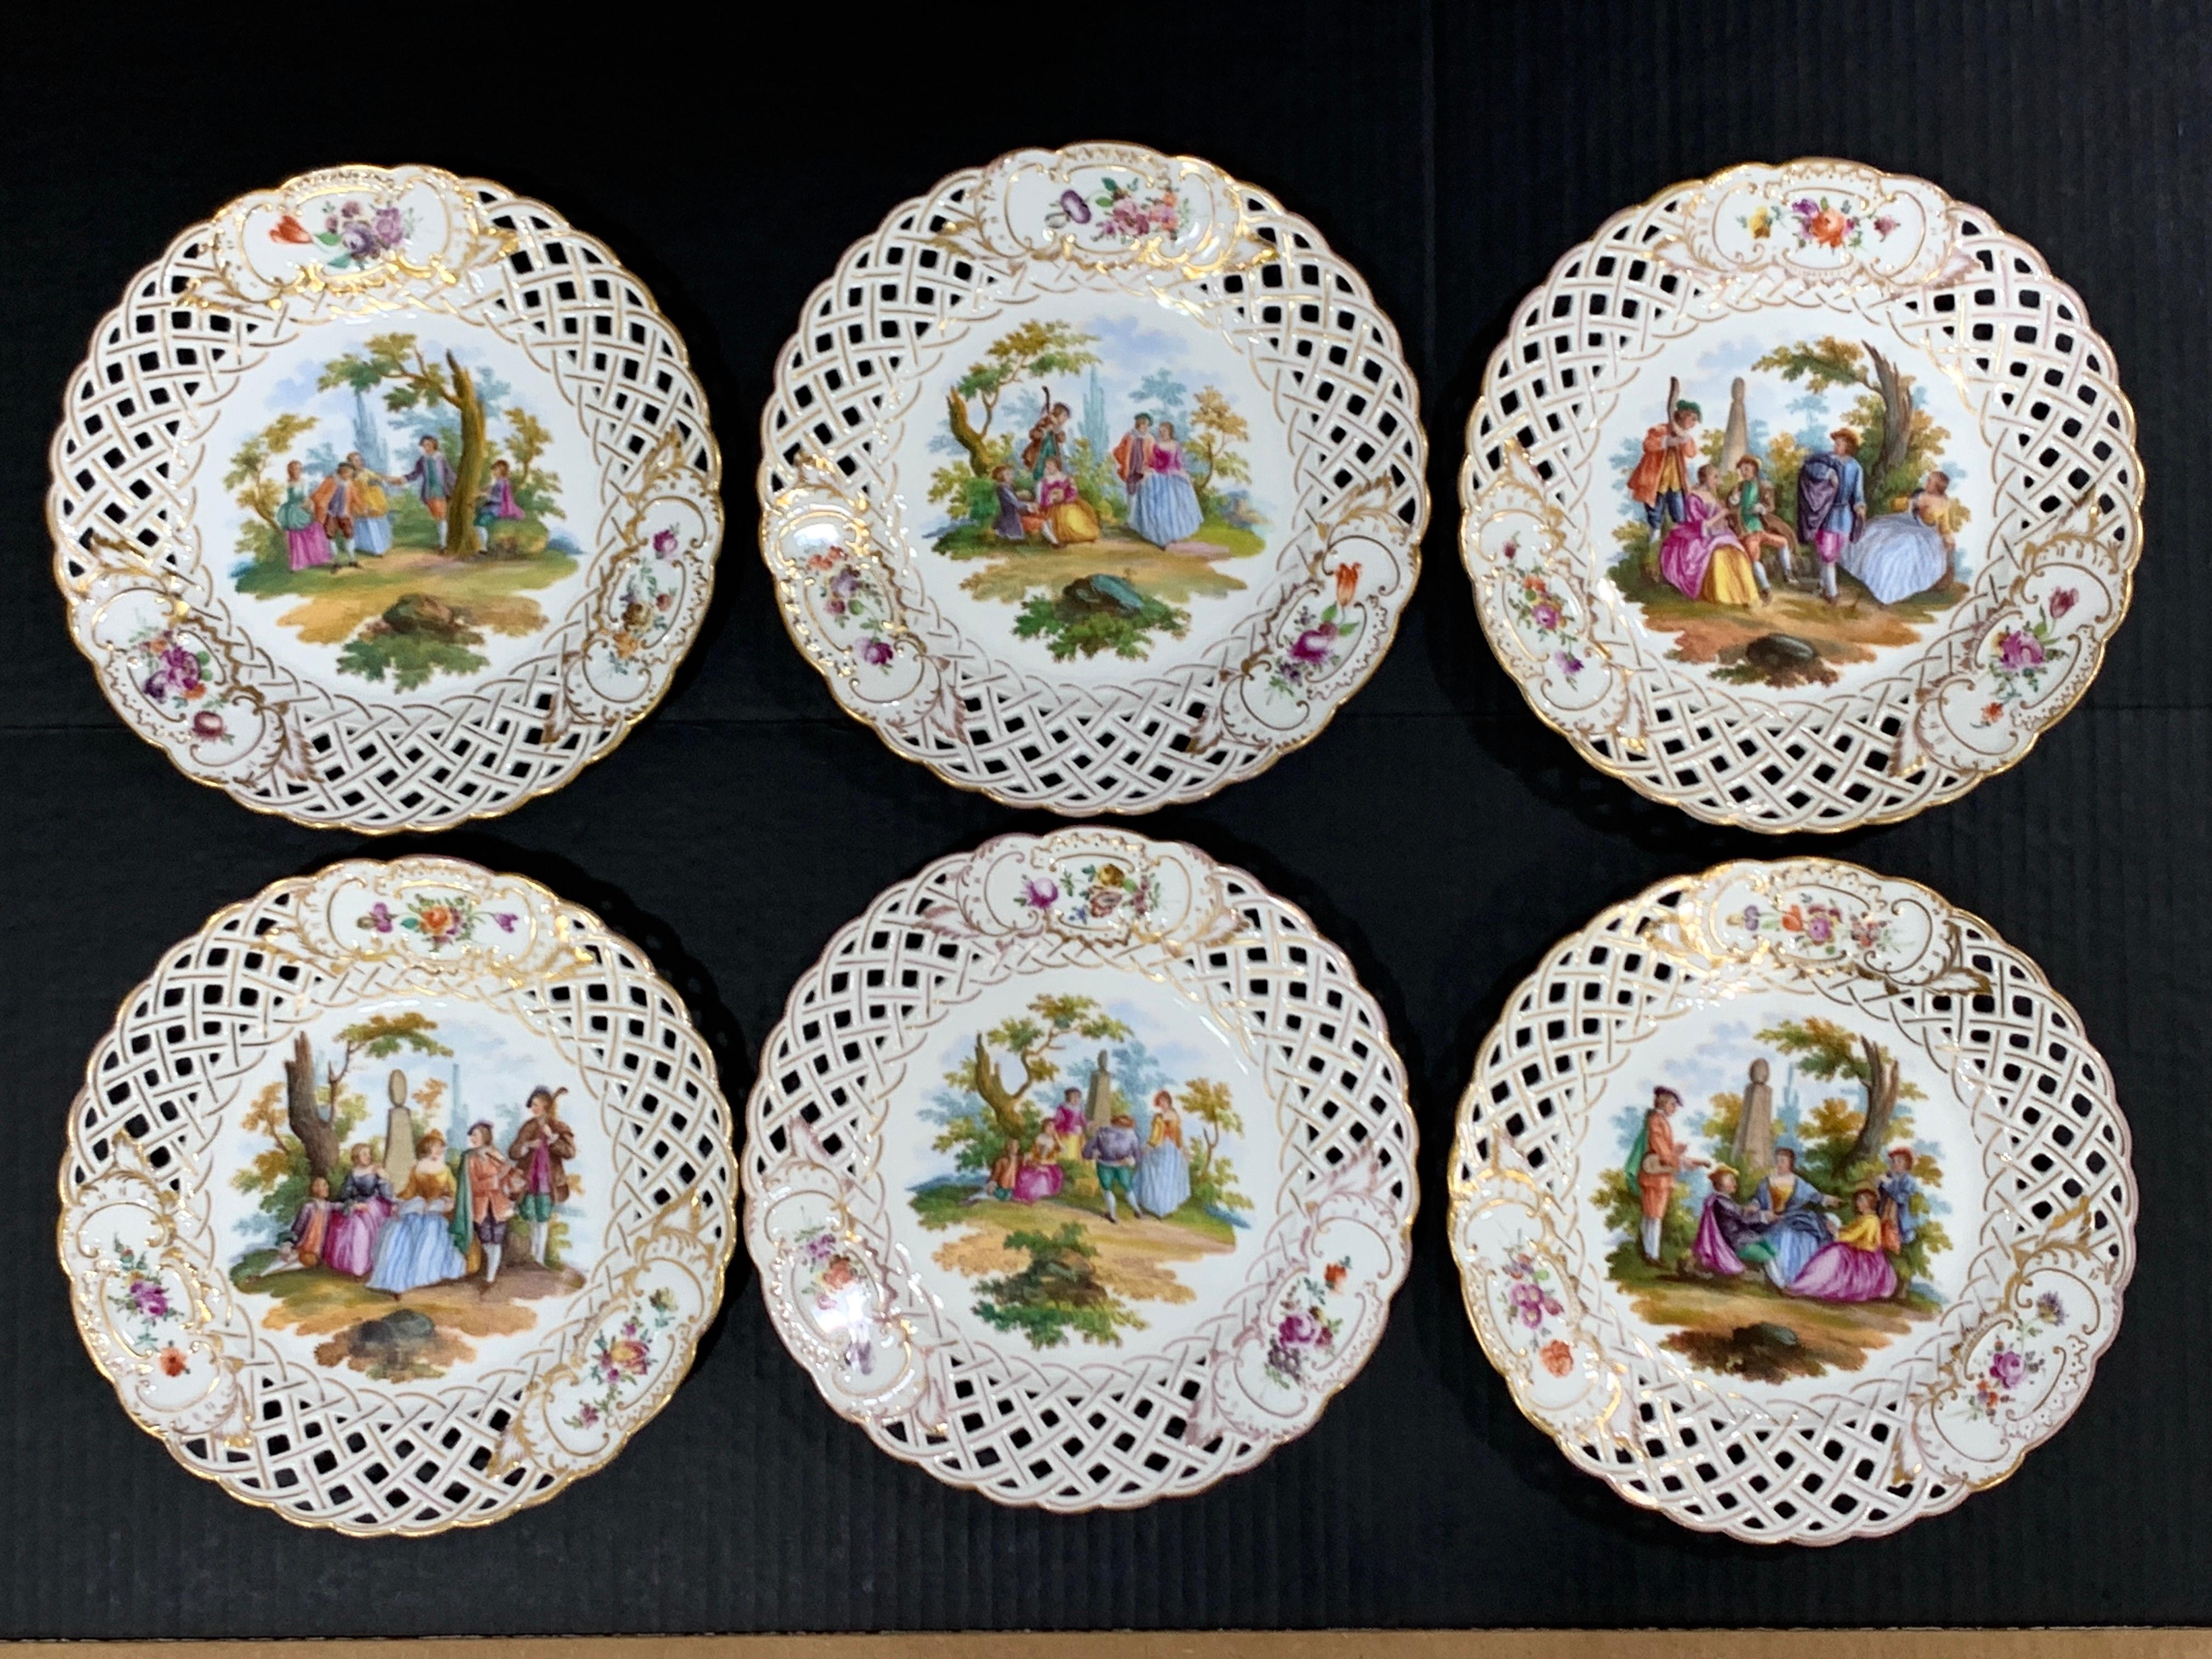 Six Dresden reticulated painted Watteau scenic cabinet plates by Carl Thieme, each one exquisitely painted and gilt with a different garden scene. Marked with blue underglaze mark.